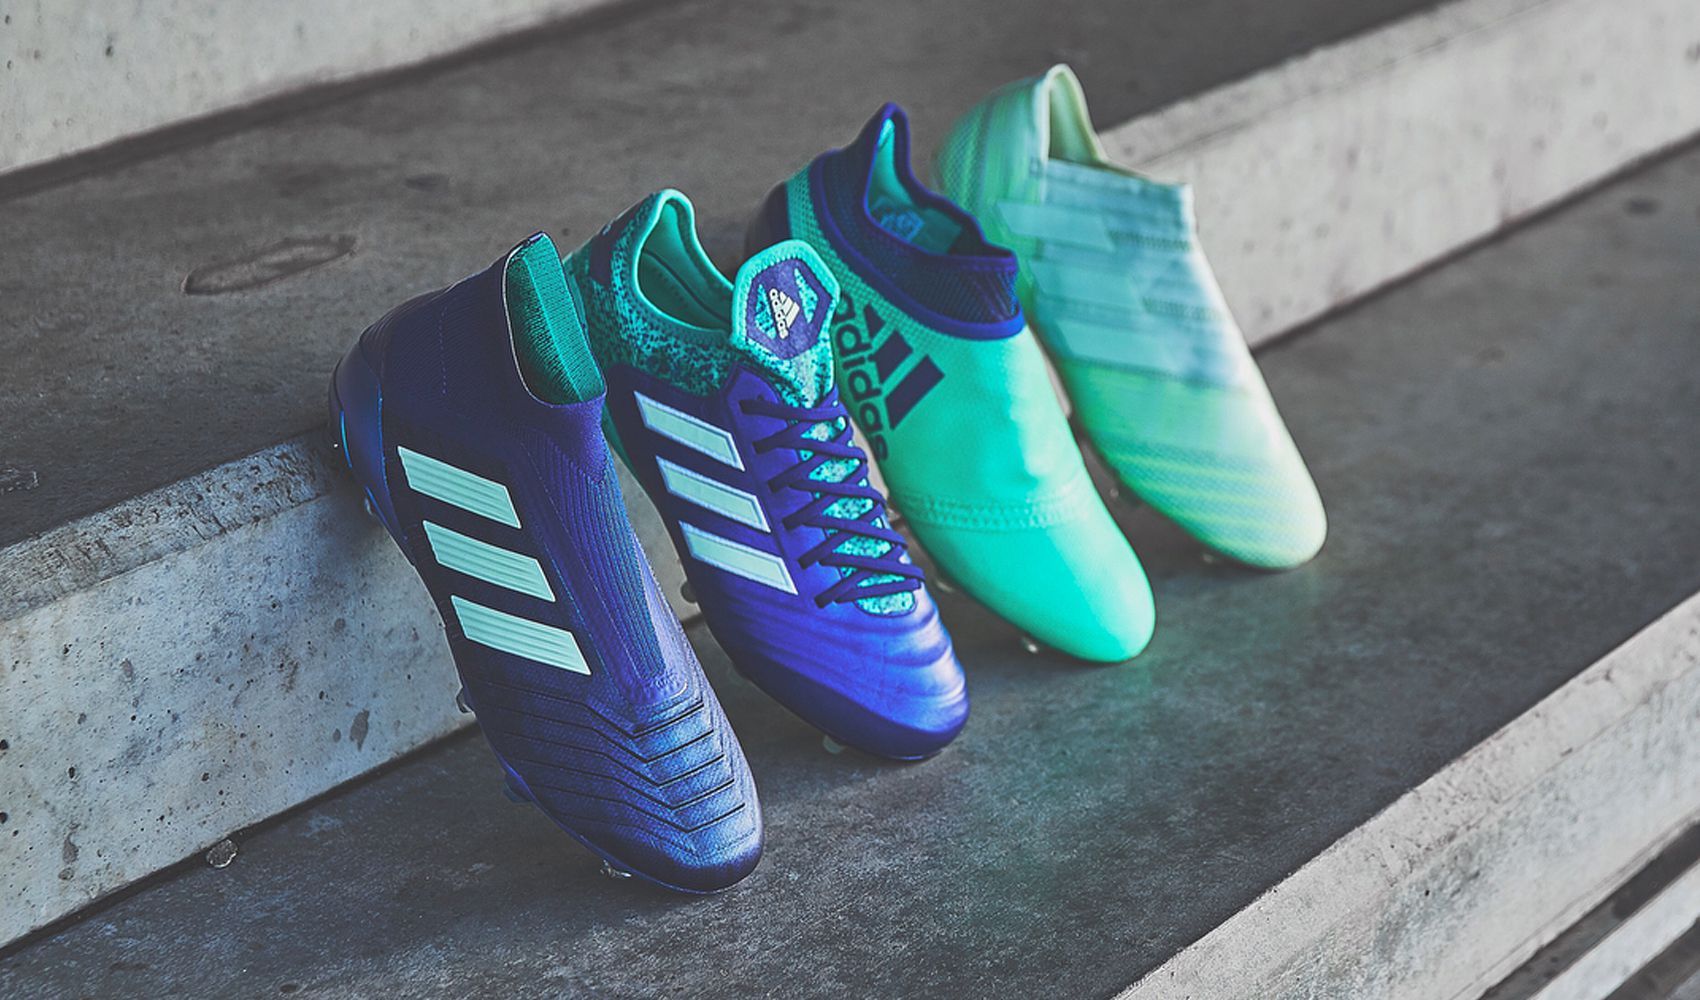 Football unveiled the "Deadly Strike" pack